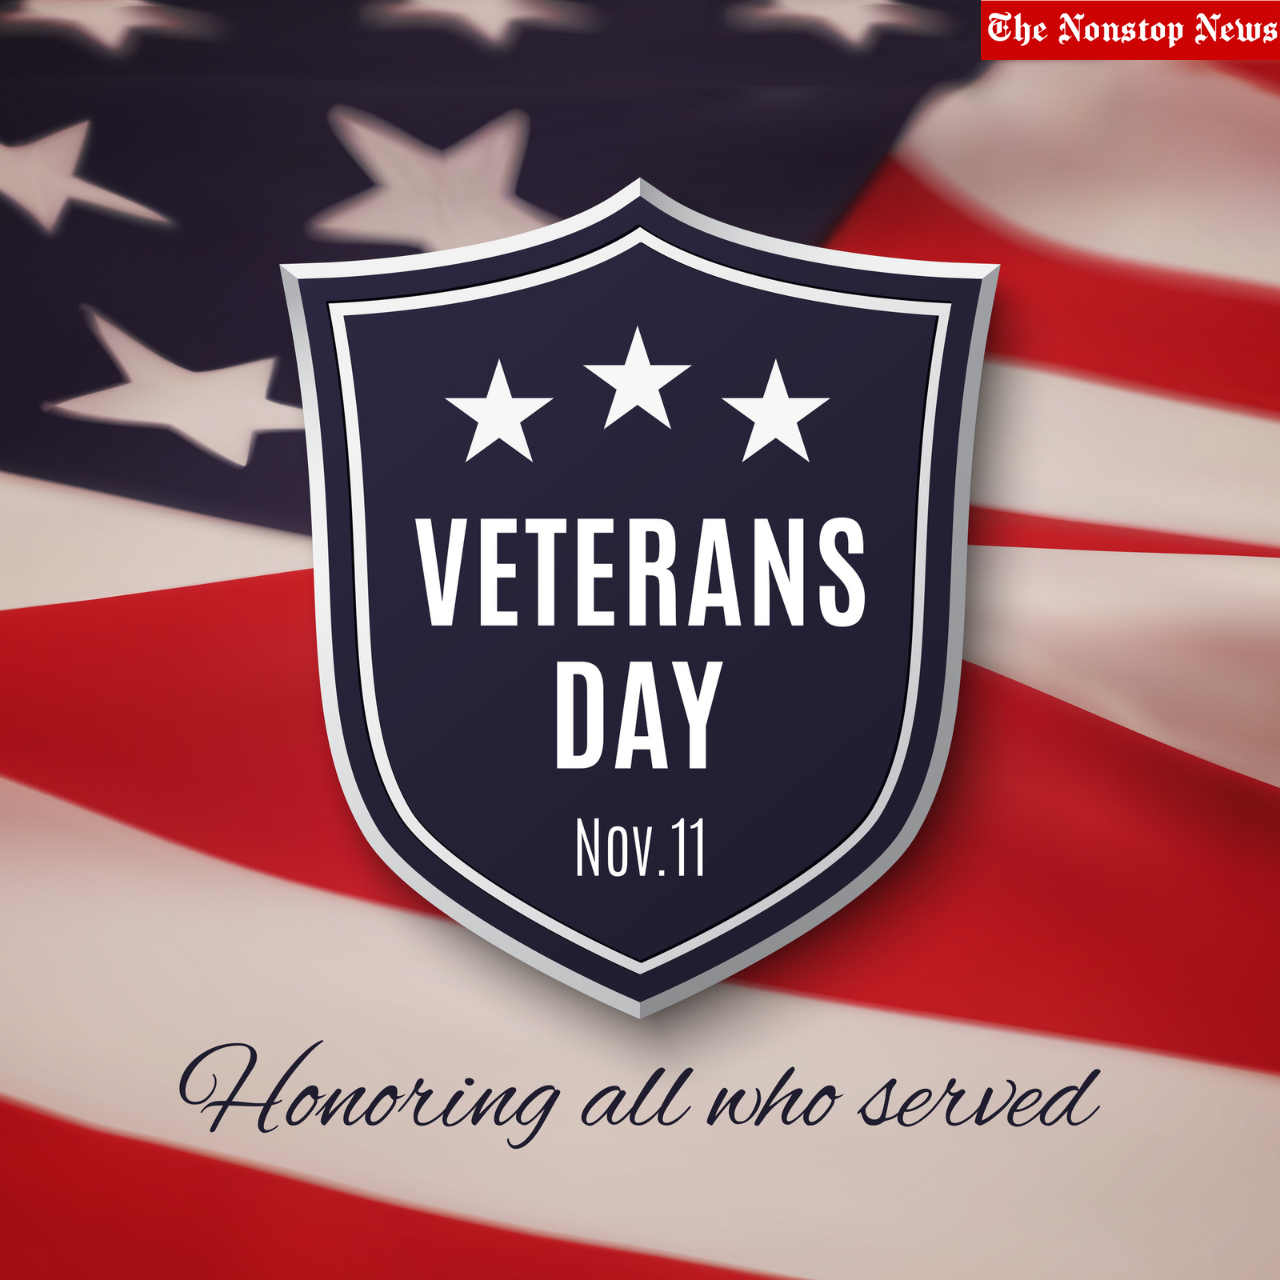 Happy Veterans Day 2022 Instagram Captions, Twitter Quotes, Reddit Greetings, Facebook Messages, Pinterest Images, WhatsApp Status, Cliparts, and Gifs